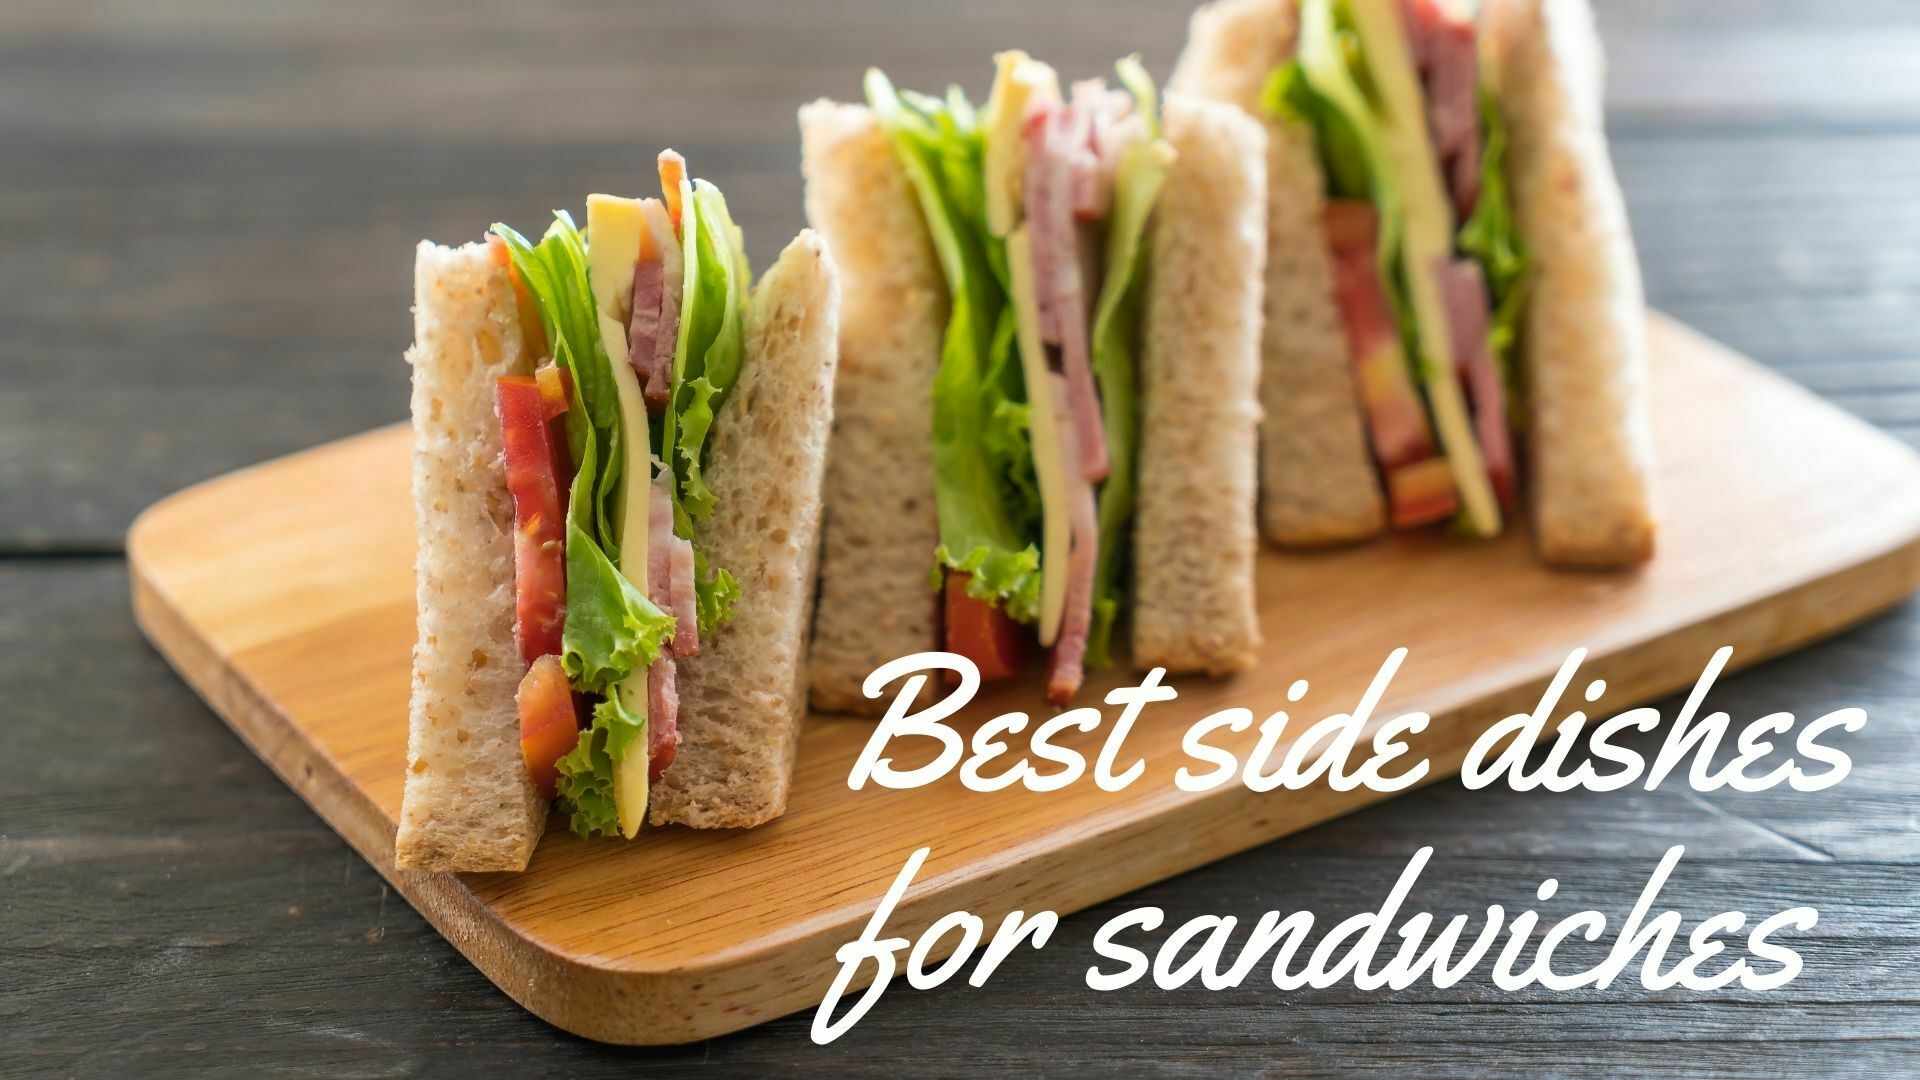 Best side dishes for sandwiches